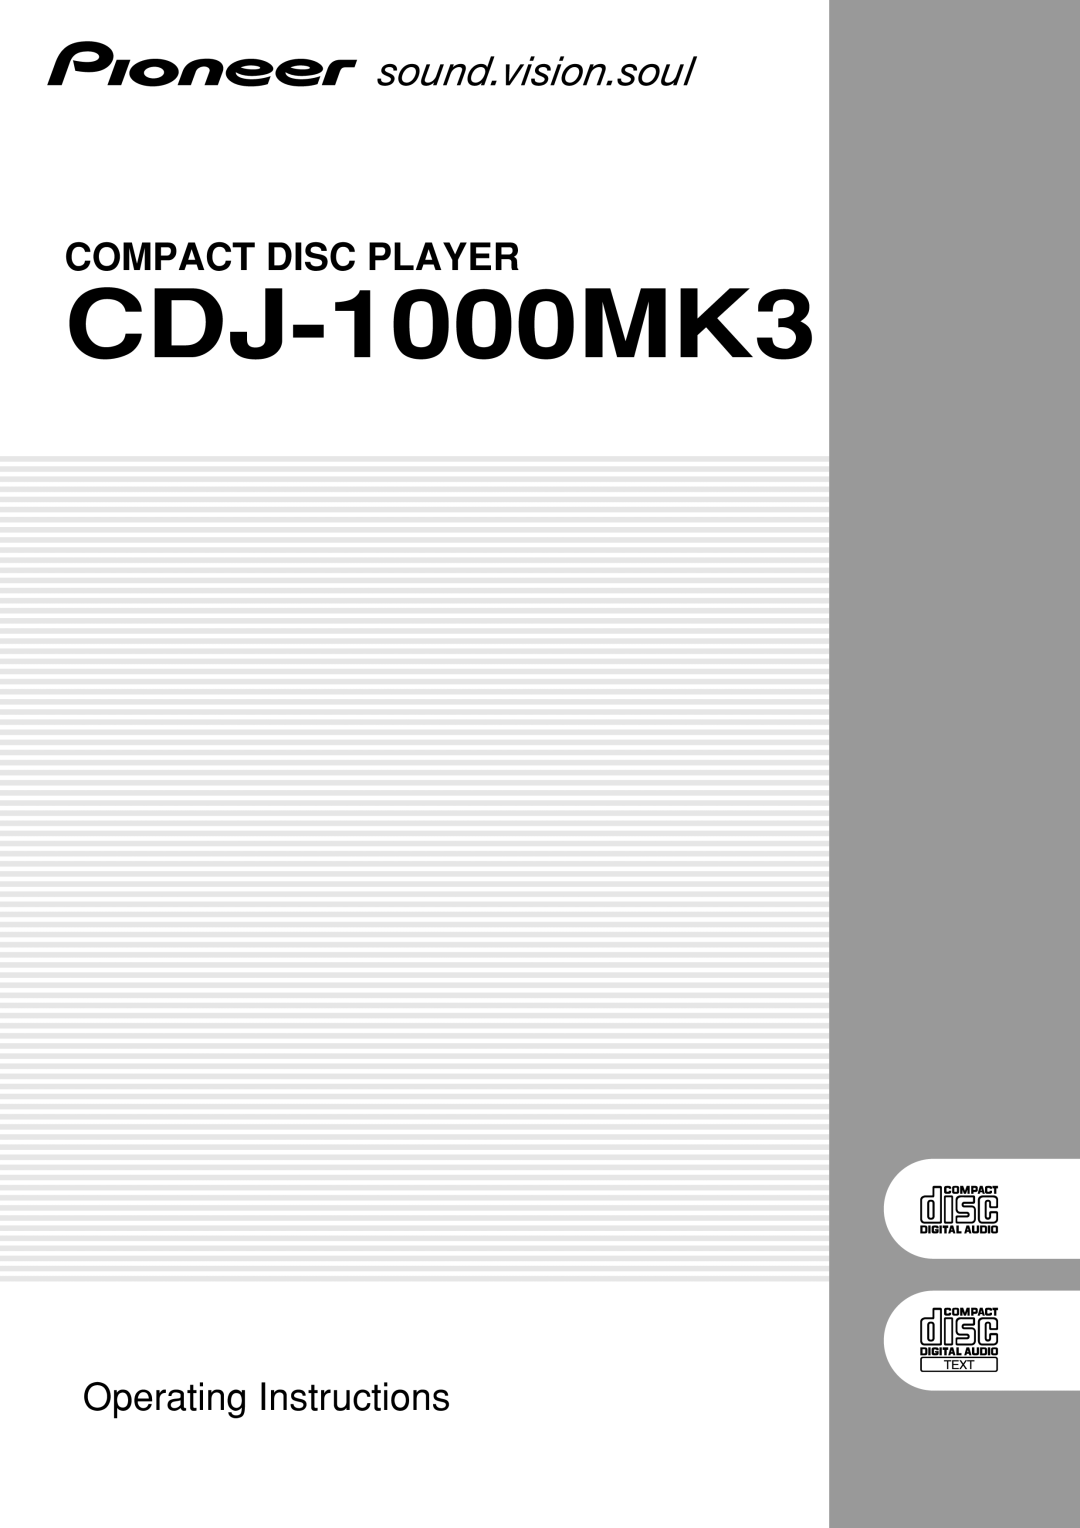 Pioneer CDJ-1000MK3, compact disc player manual Compact Disc Player, Operating Instructions 